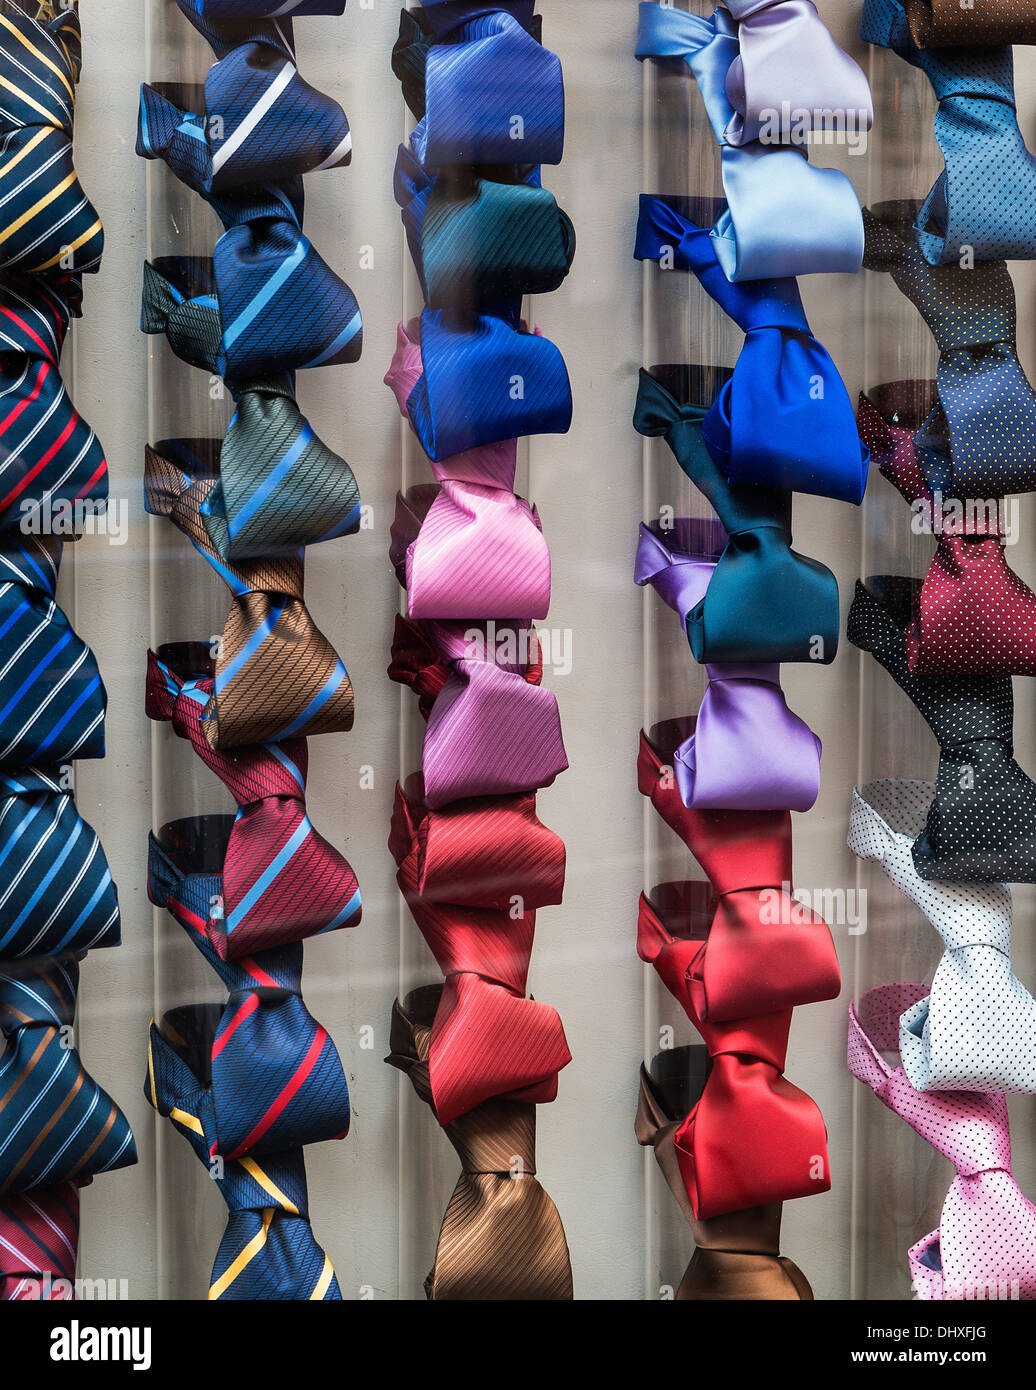 Silk ties display in a store window, Rome, Italy Stock Photo